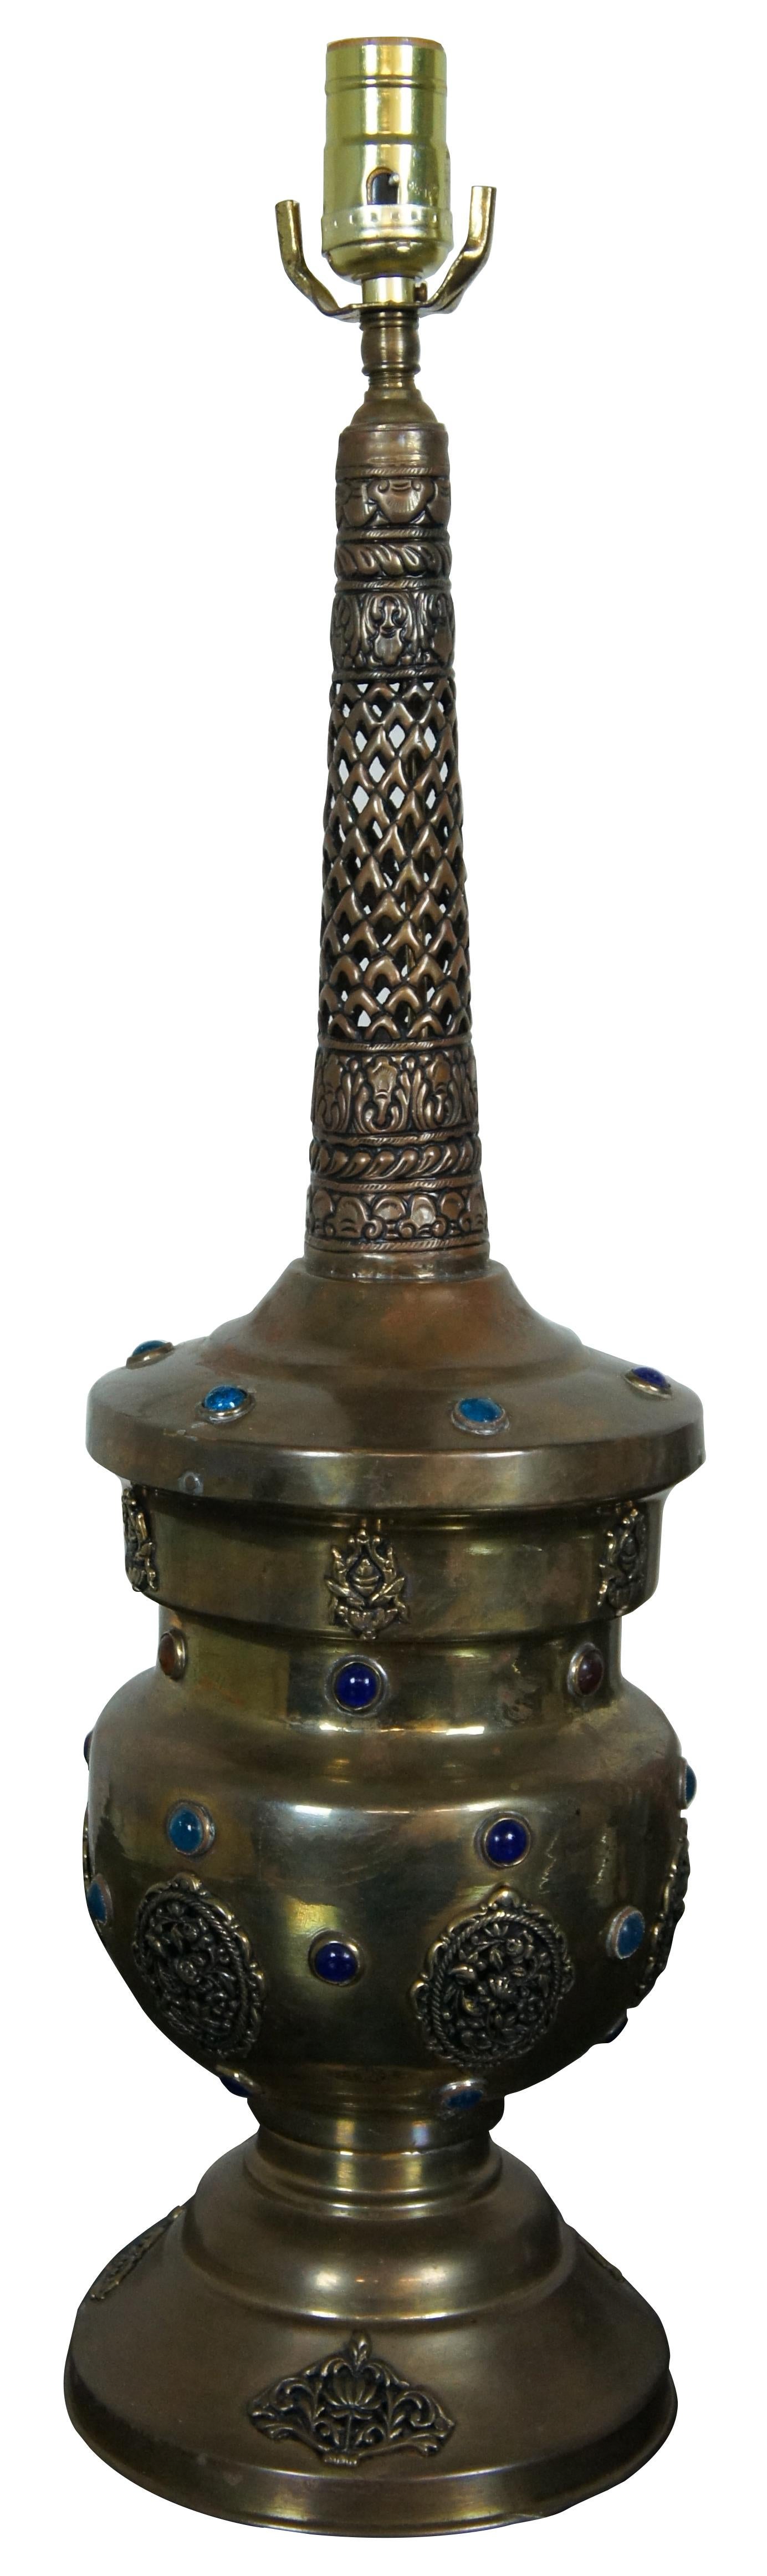 Vintage Moroccan Moorish Pierced Reticulated Jeweled Brass Table Lamp In Good Condition For Sale In Dayton, OH